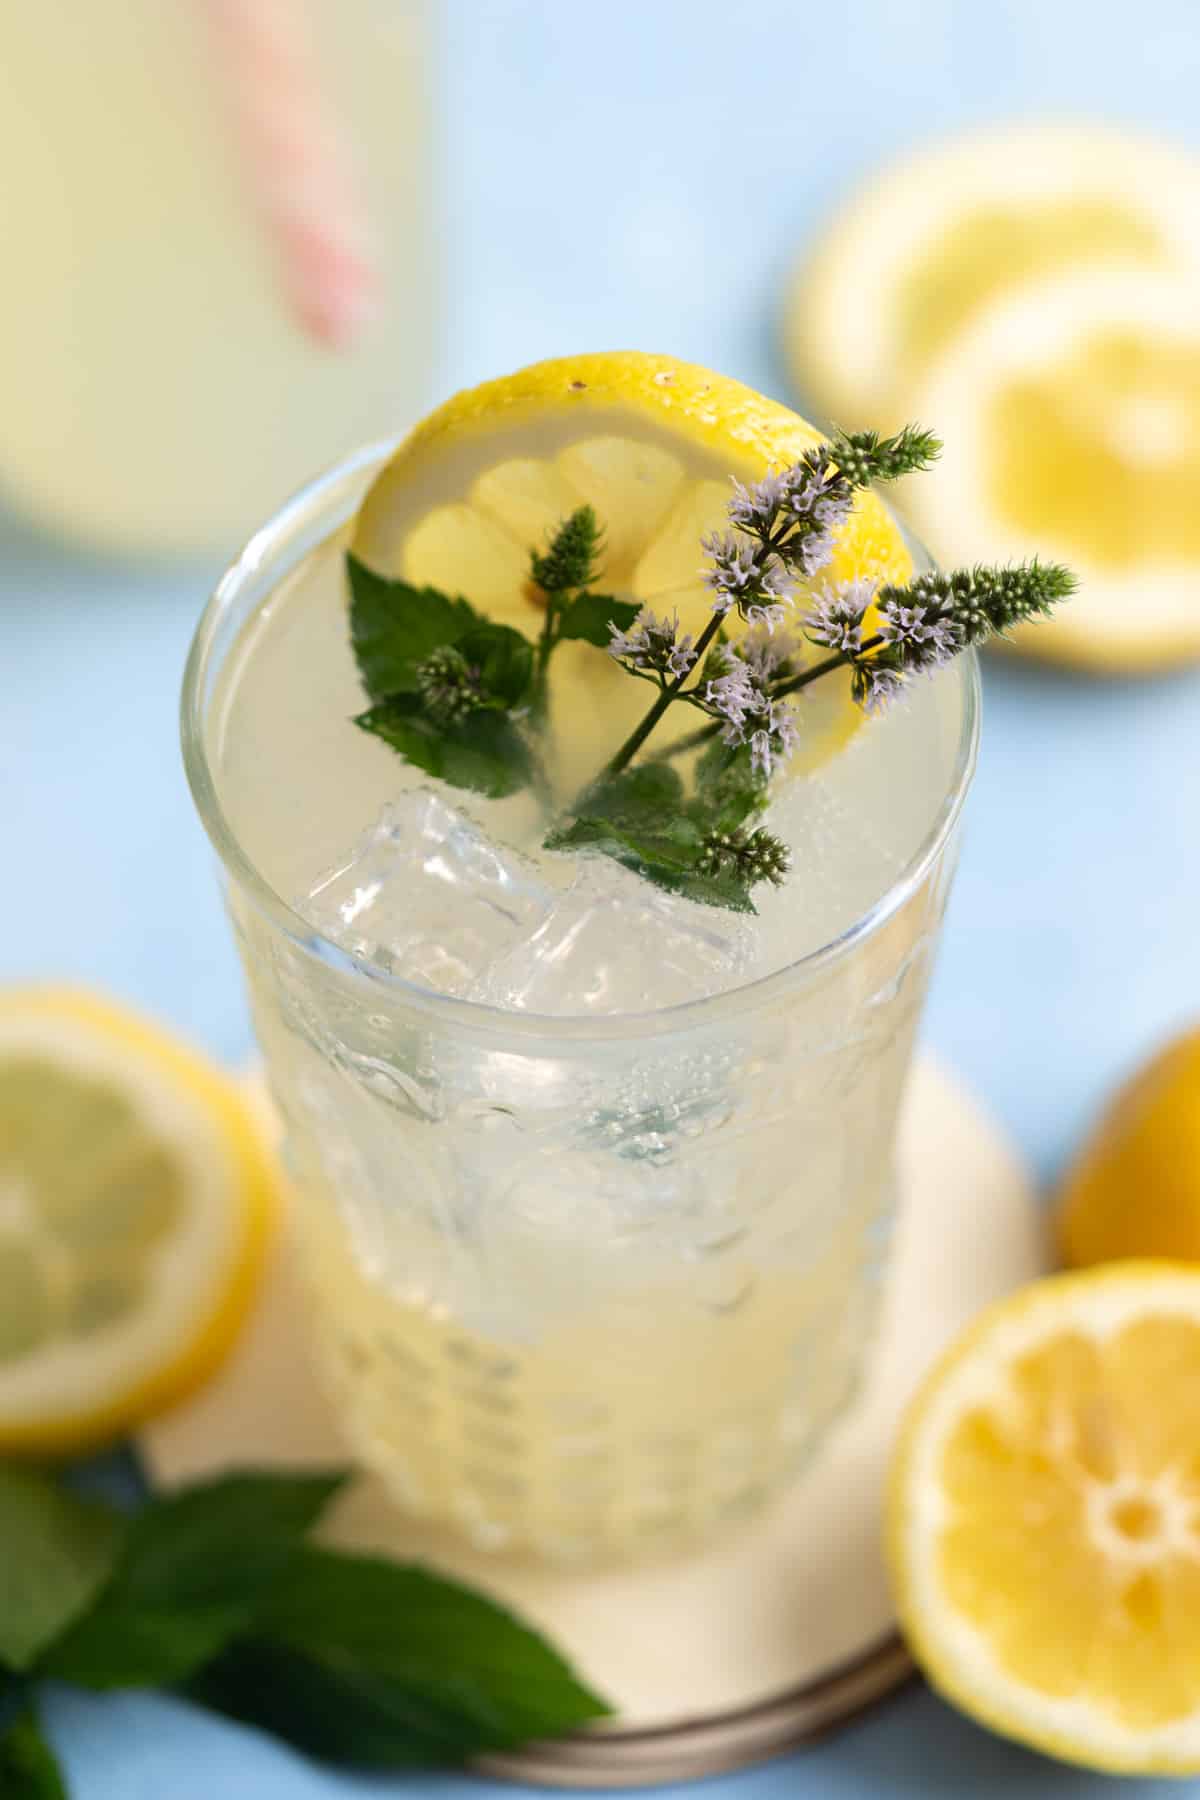 A glass with ice and homemade lemon soda with slices of lemon and fresh mint leaves.